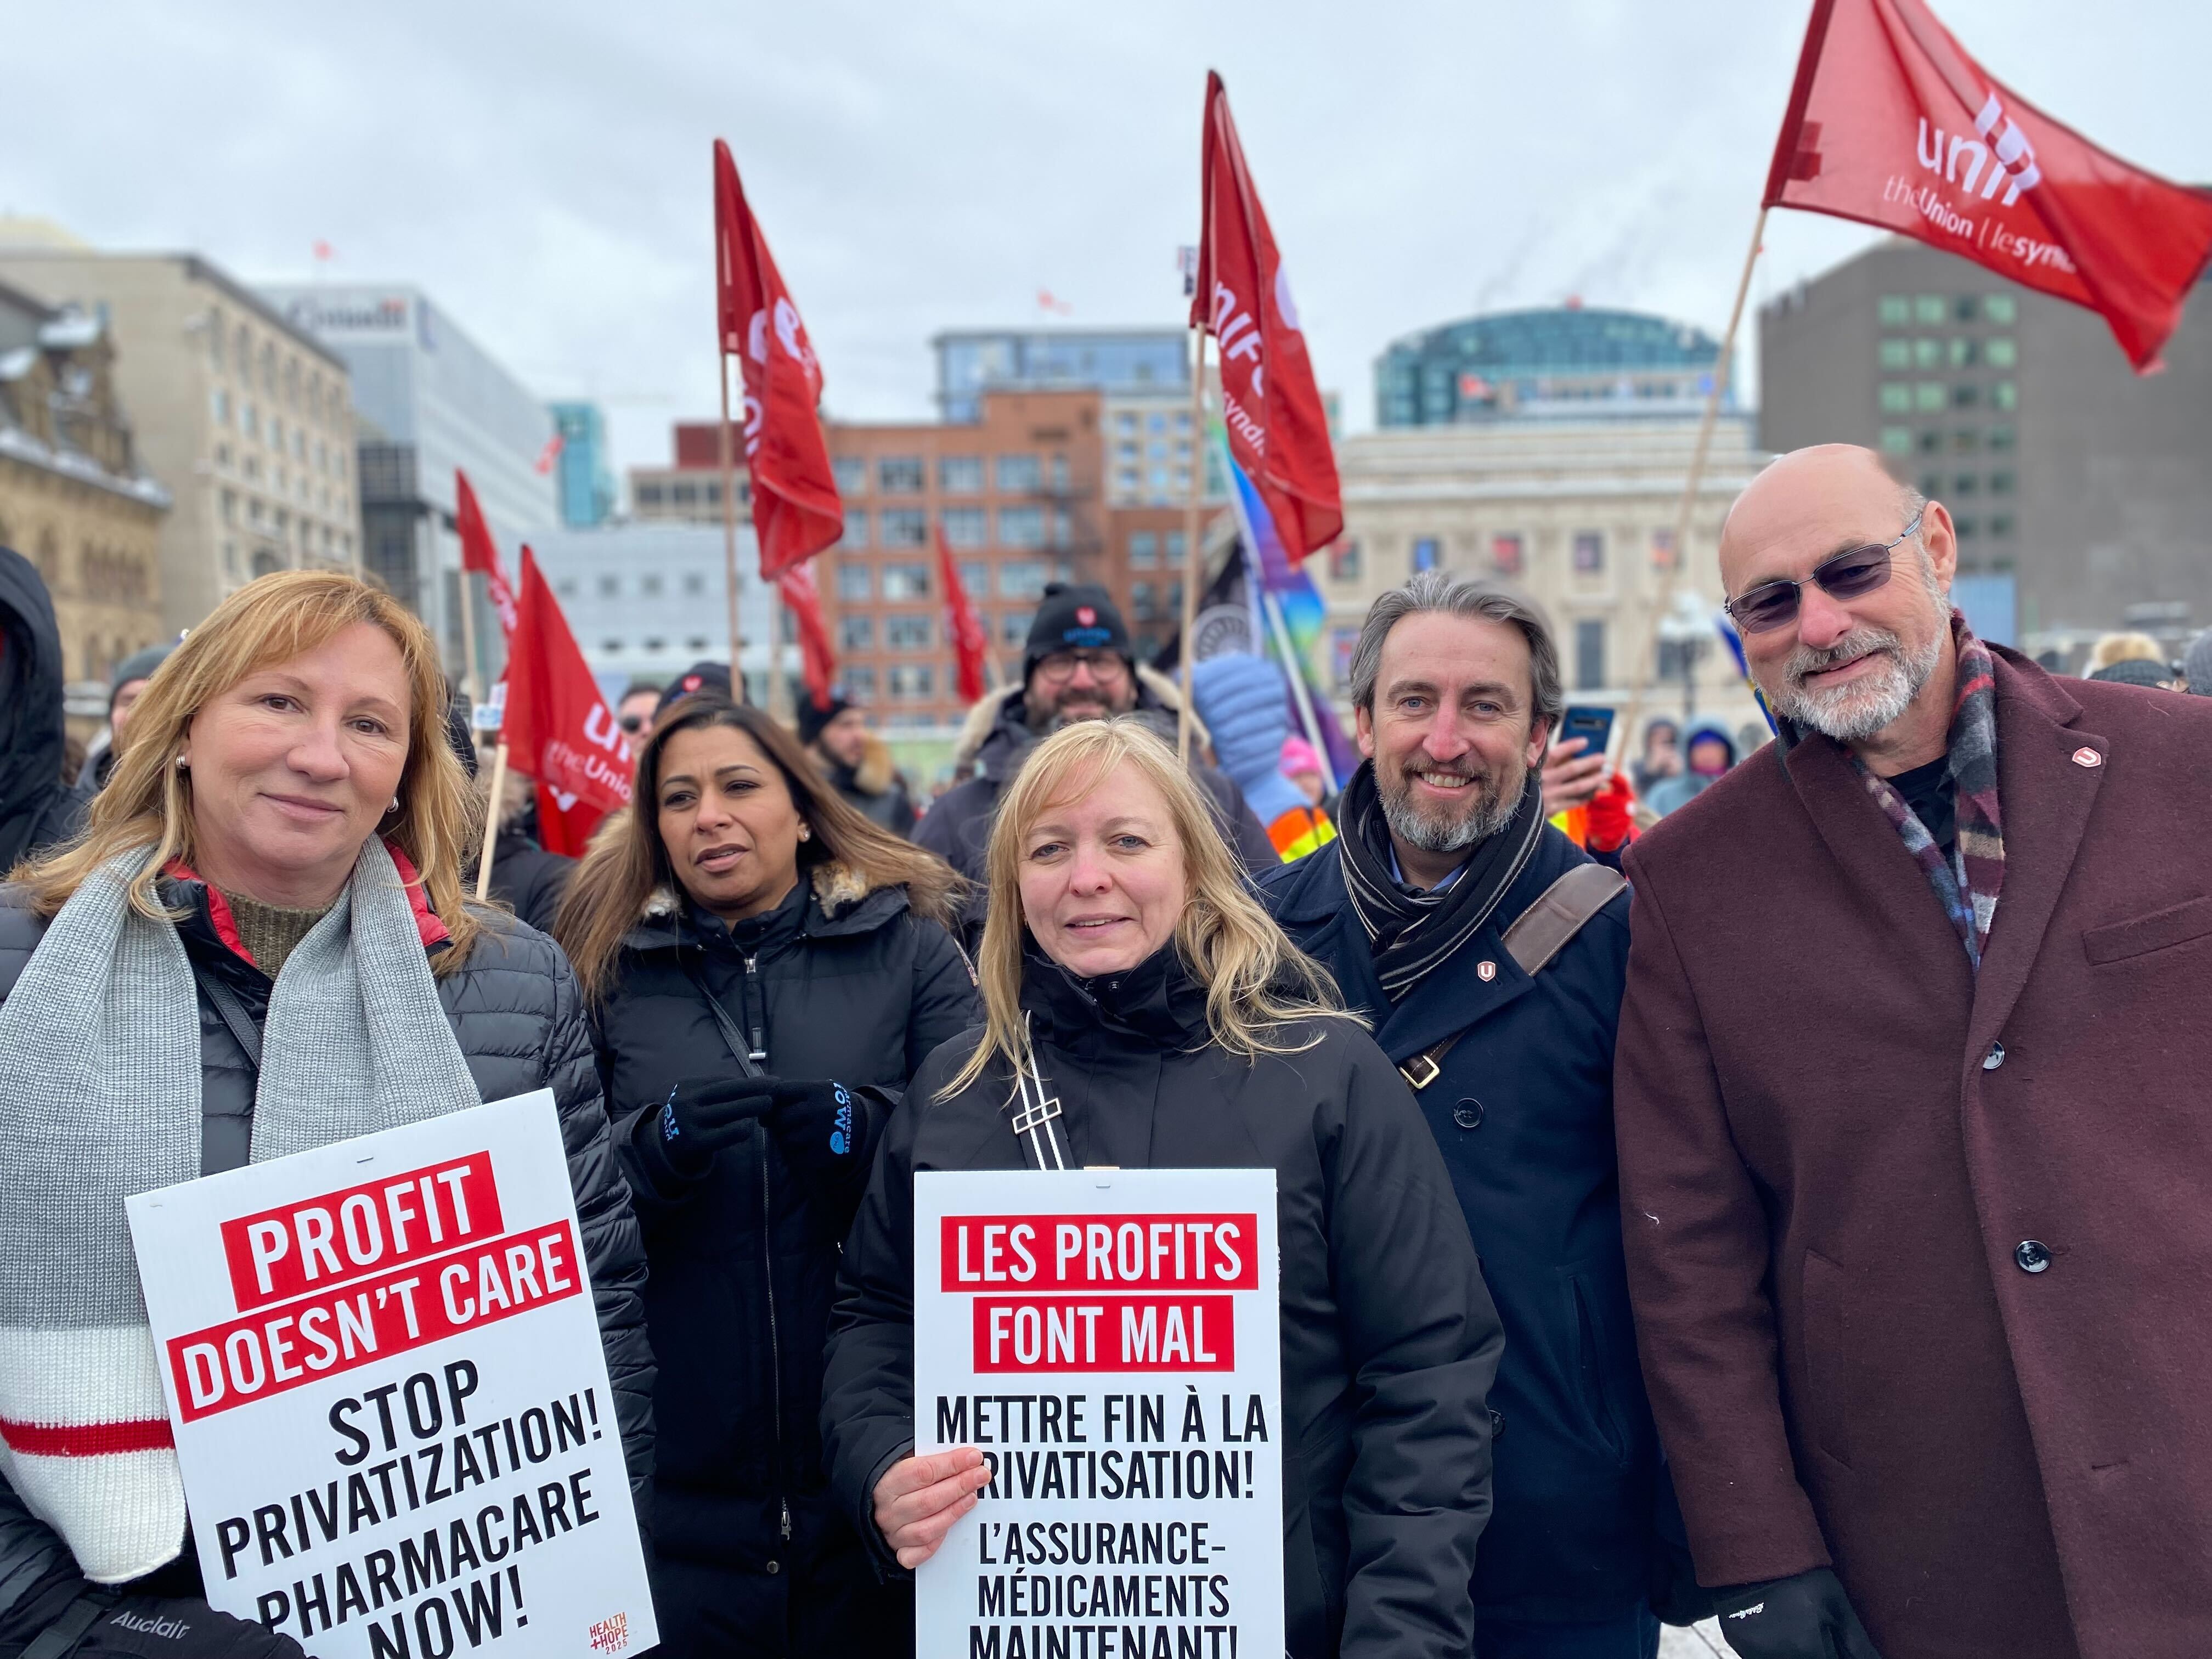 Unifor leaders at the "Profit doesn't care" rally in Ottawa